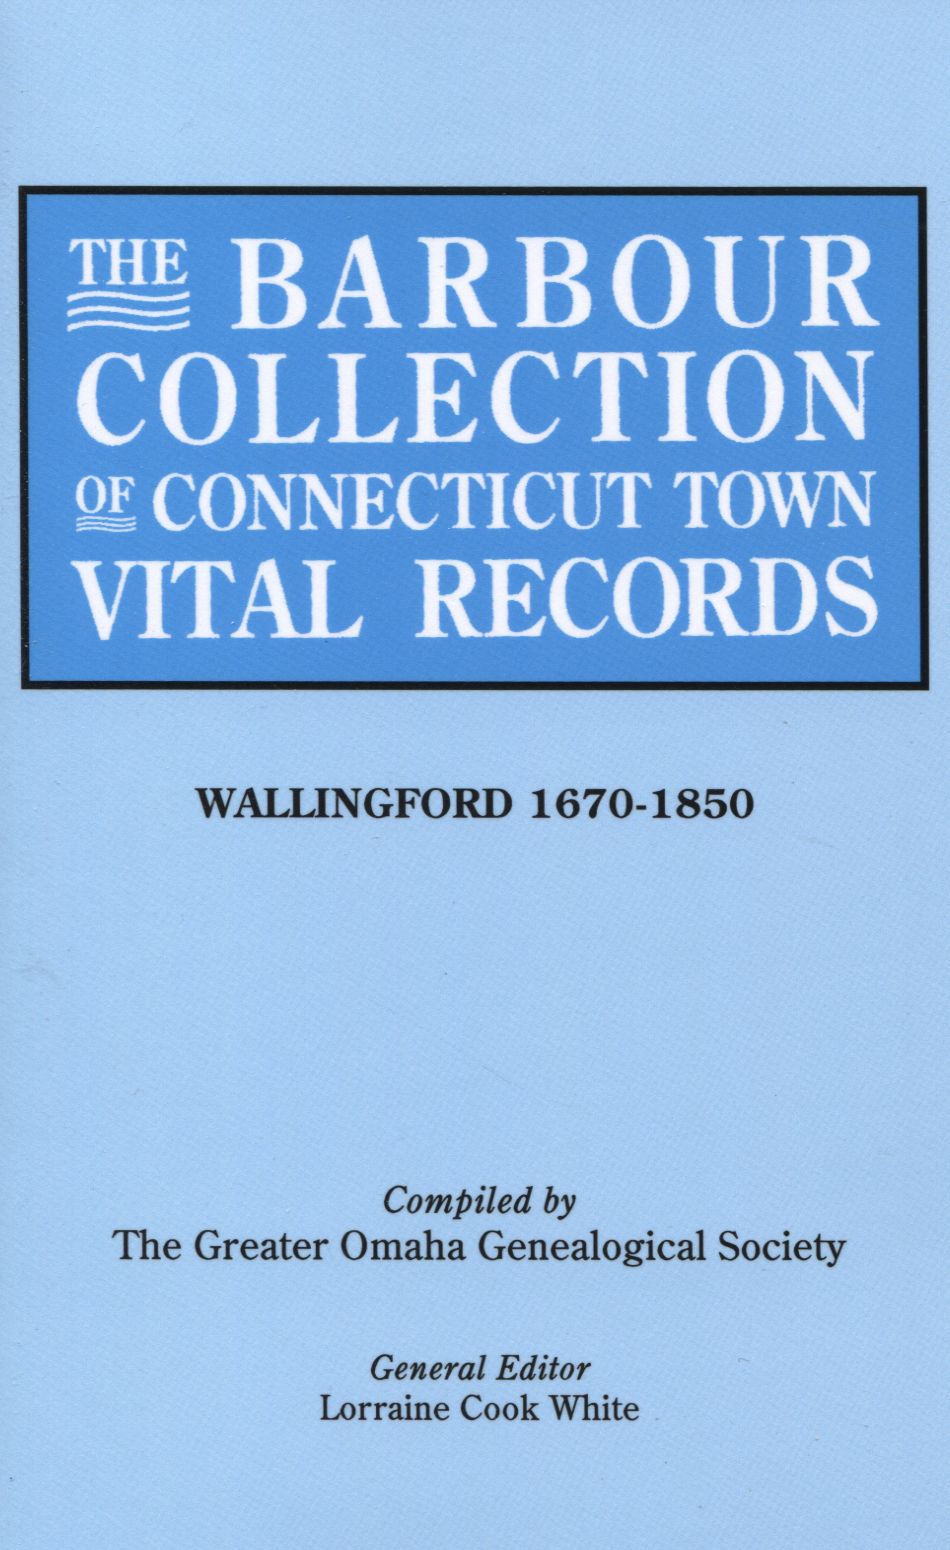 The Barbour Collection of Connecticut Town Vital Records [Vol. 48]